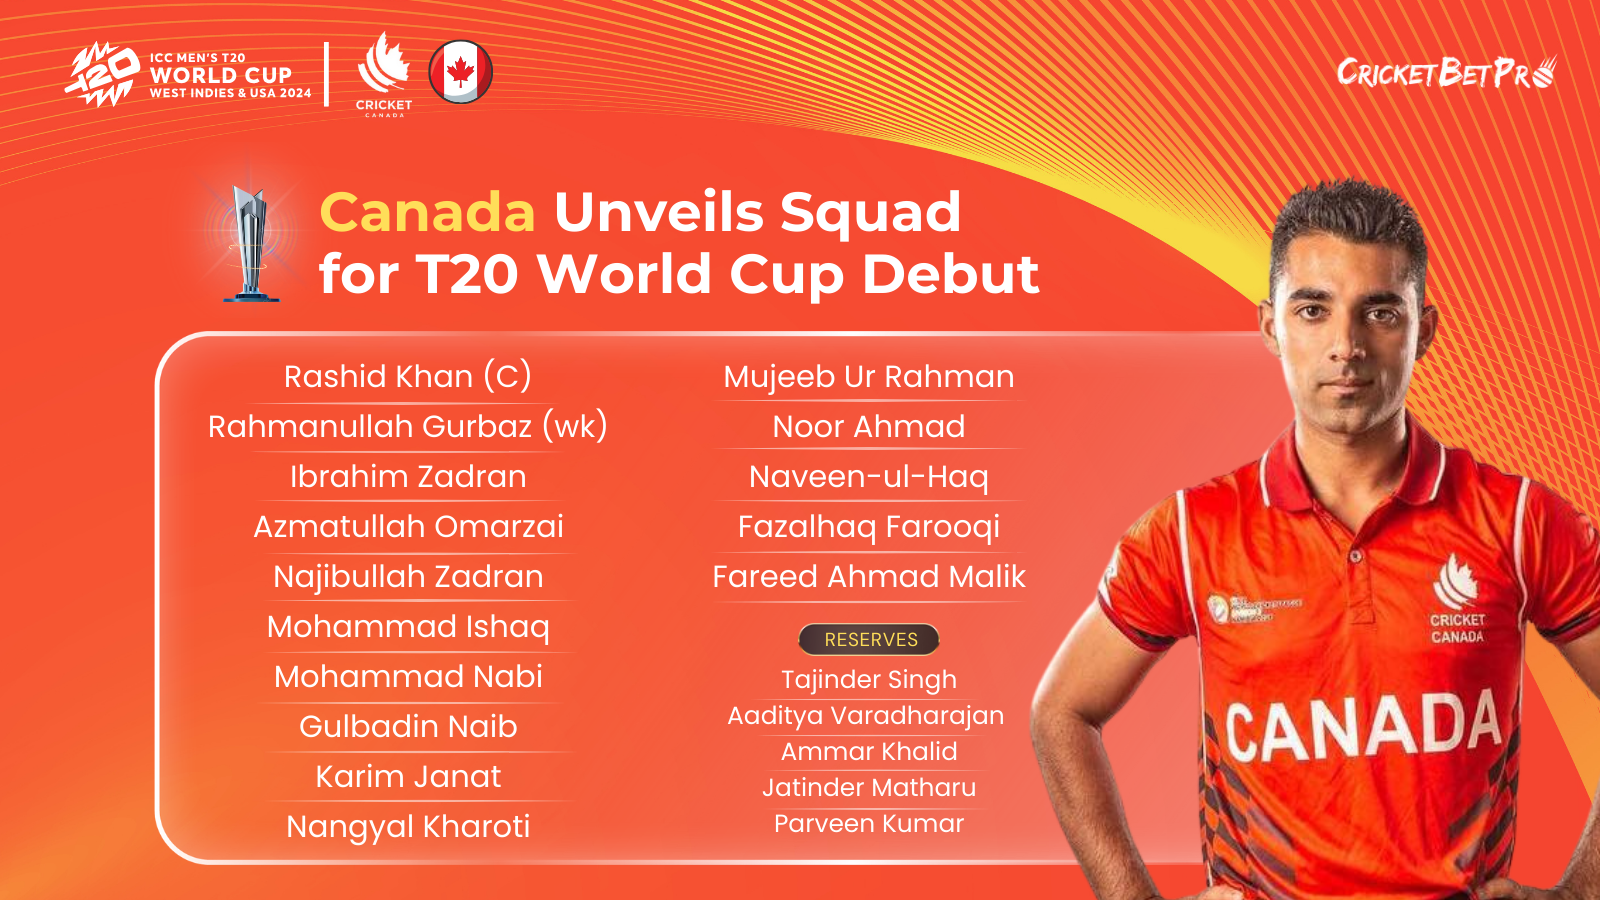 Canada Unveils Squad for T20 World Cup Debut